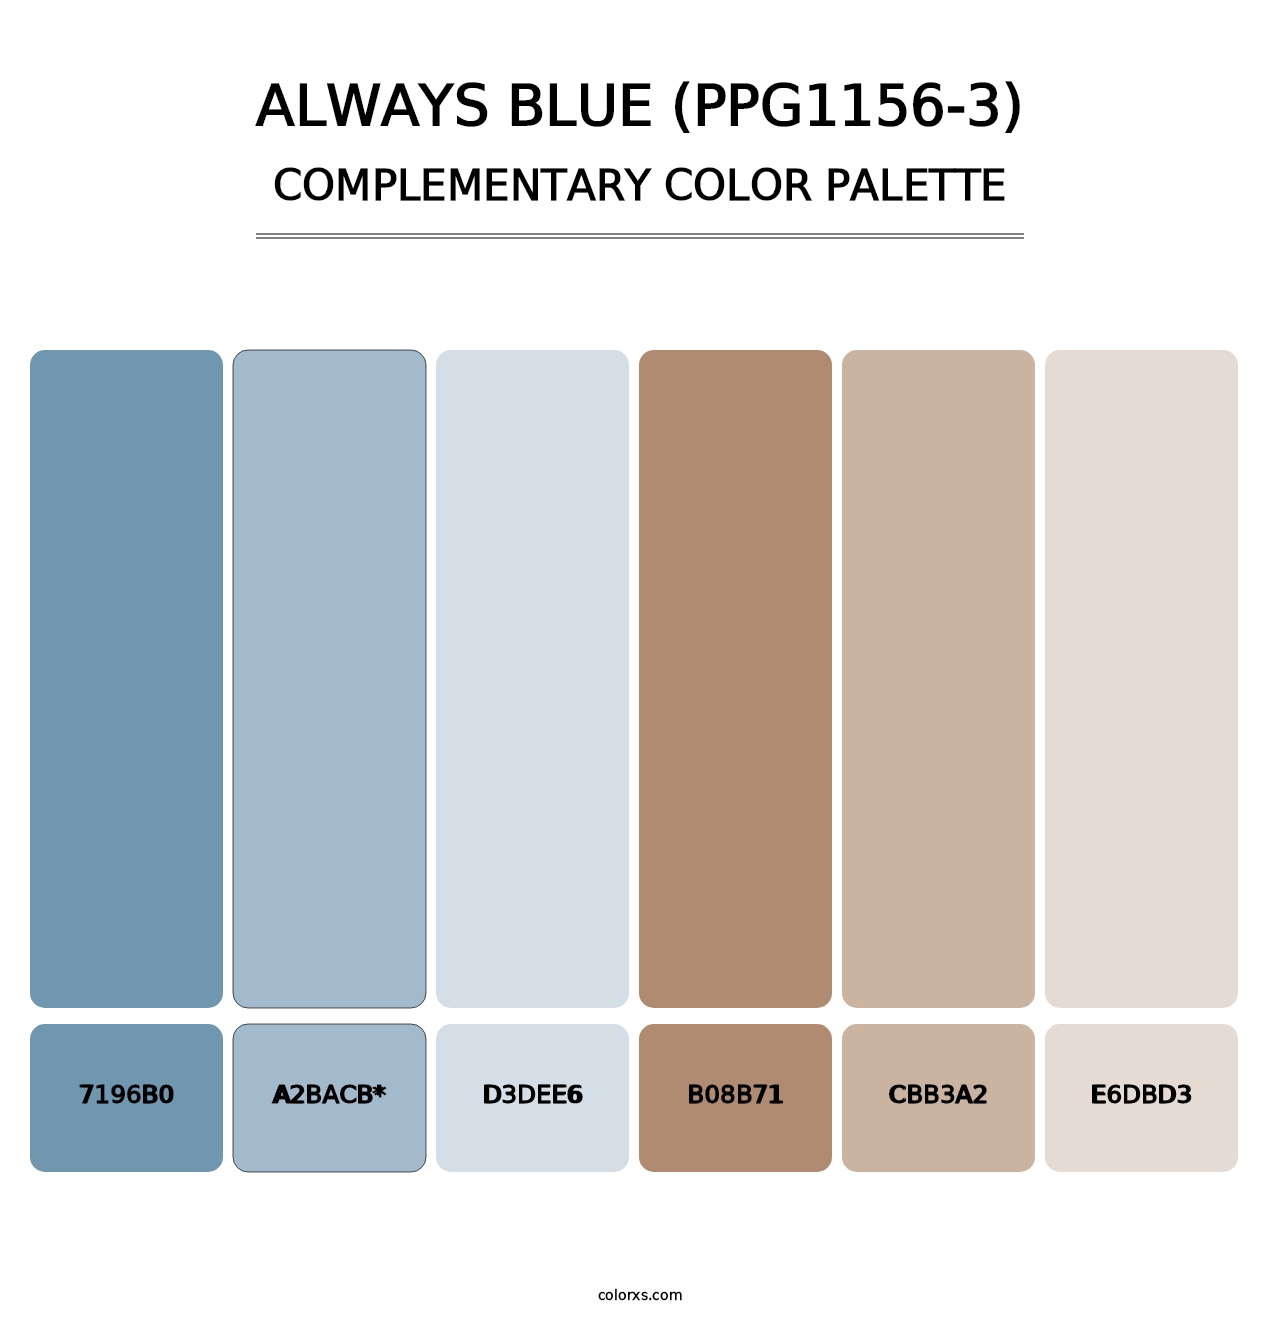 Always Blue (PPG1156-3) - Complementary Color Palette